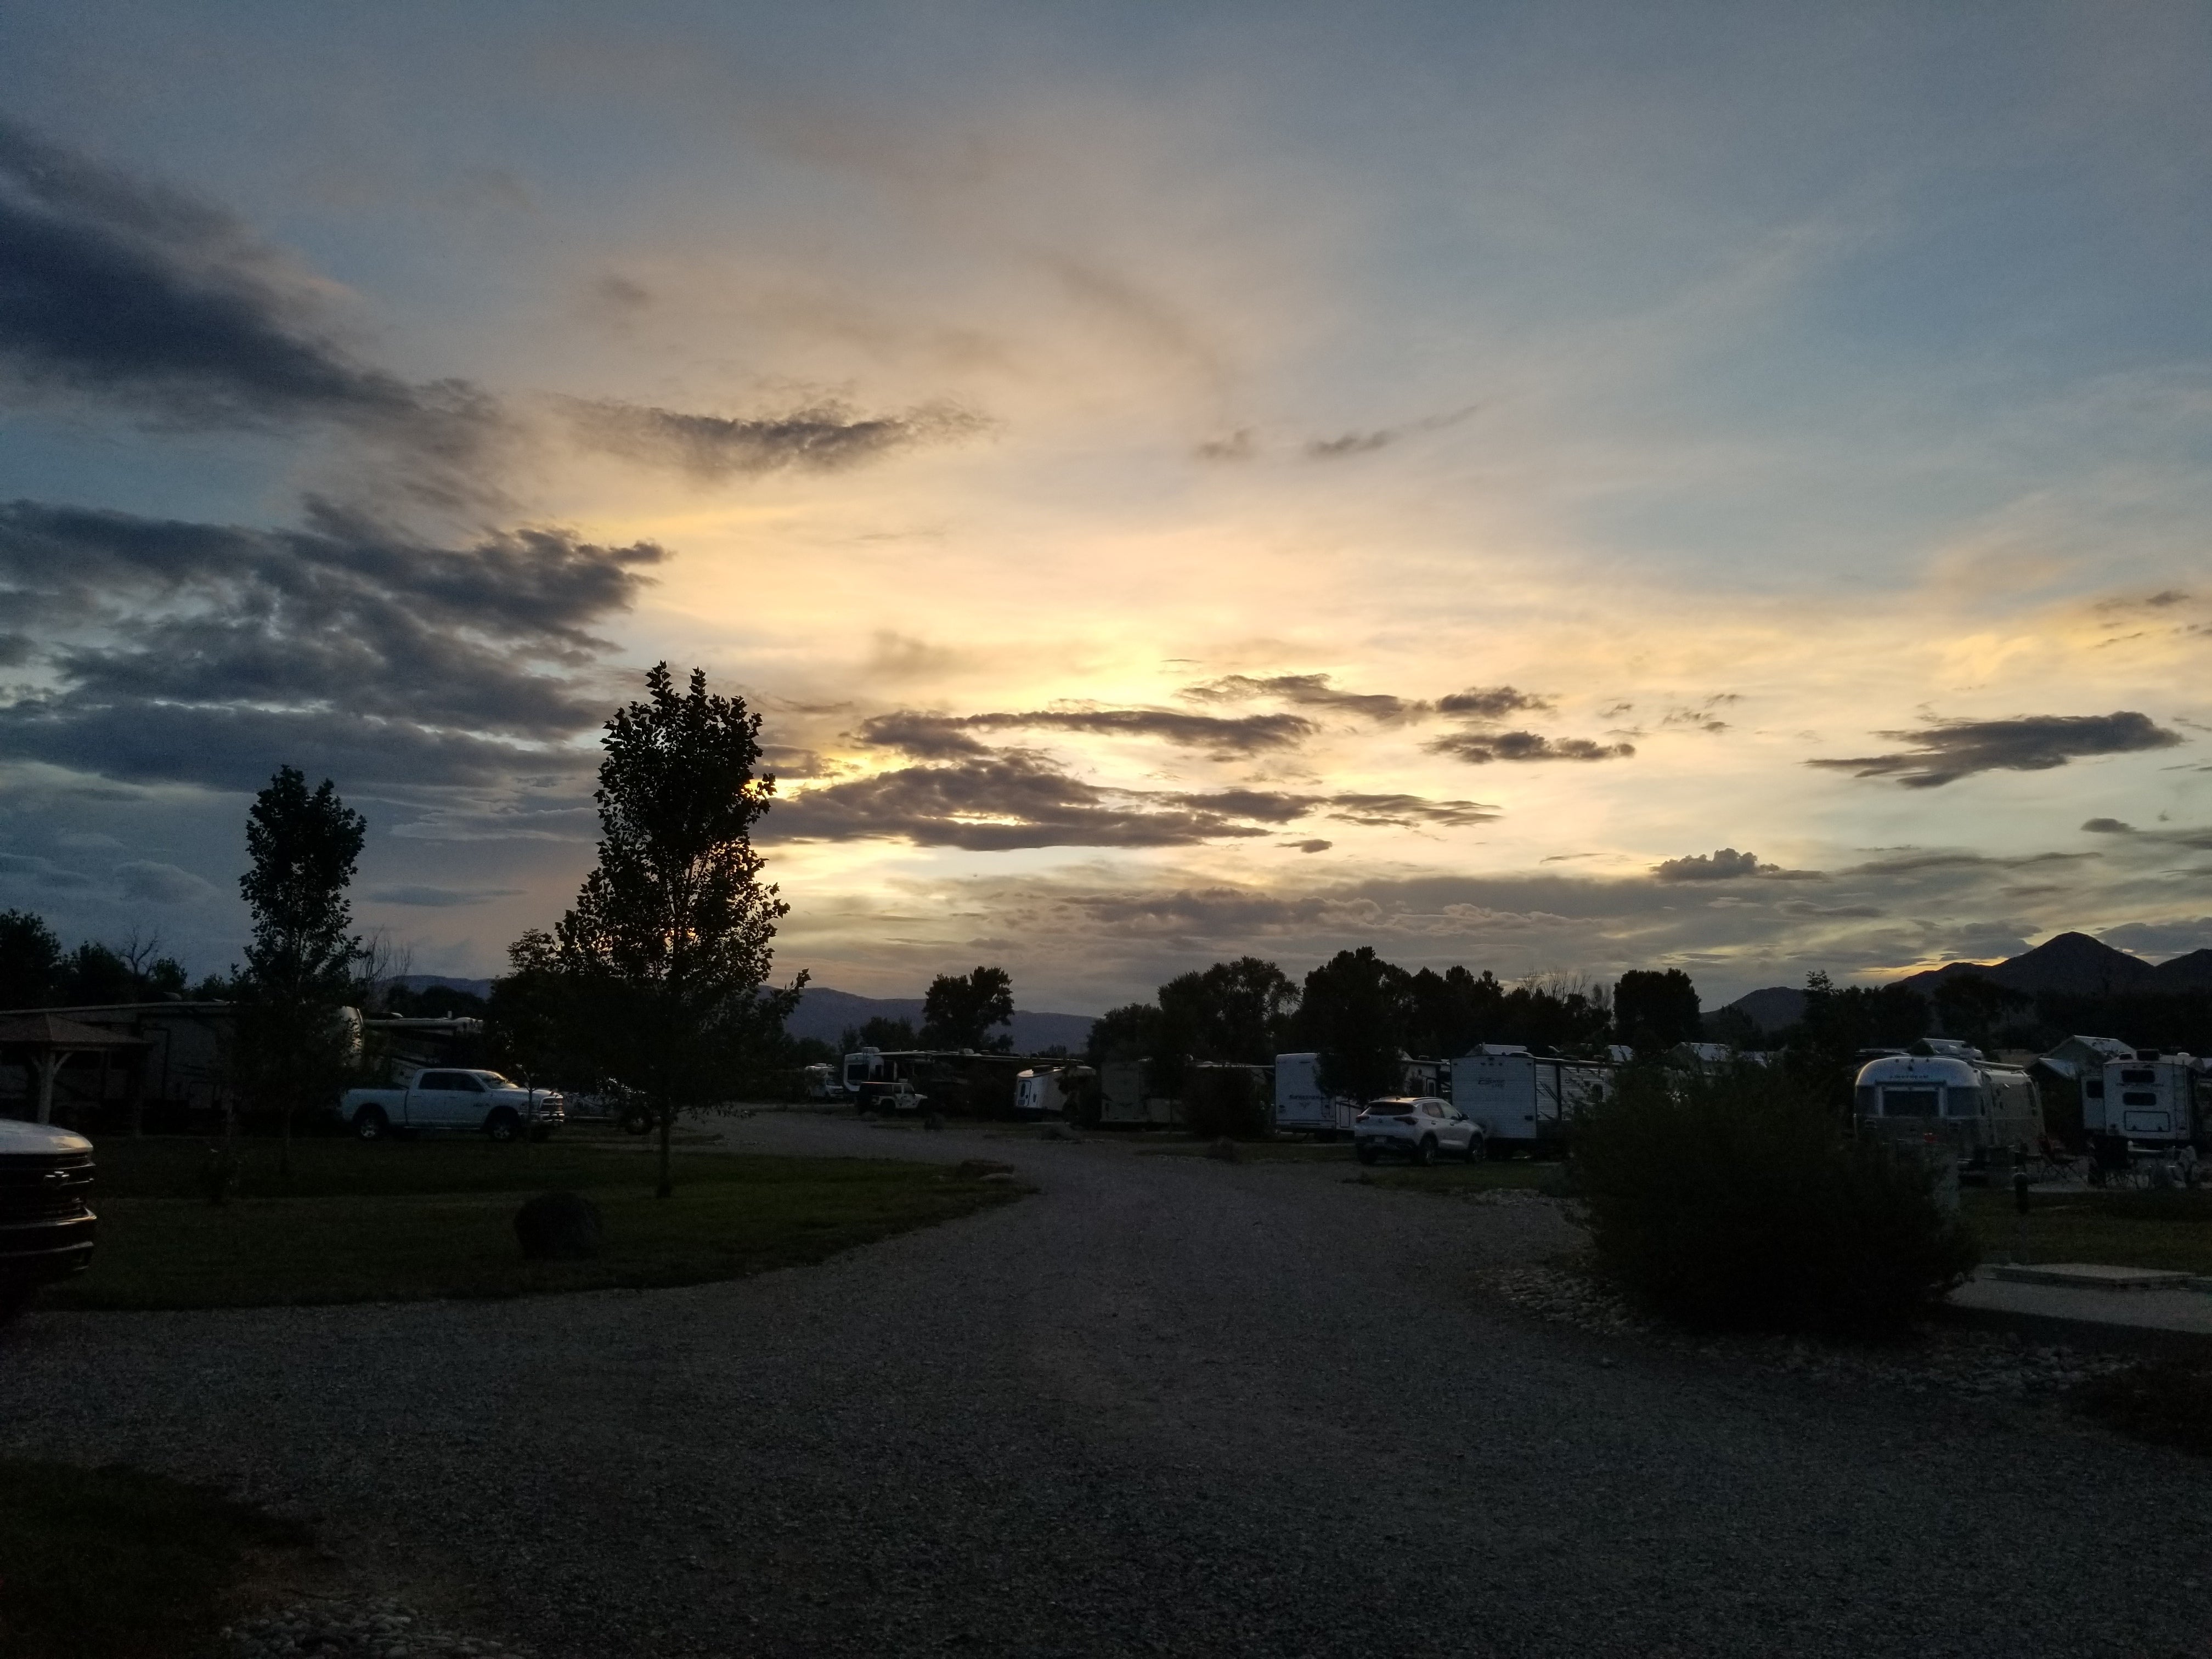 Camper submitted image from Heron's Nest RV Park - 1